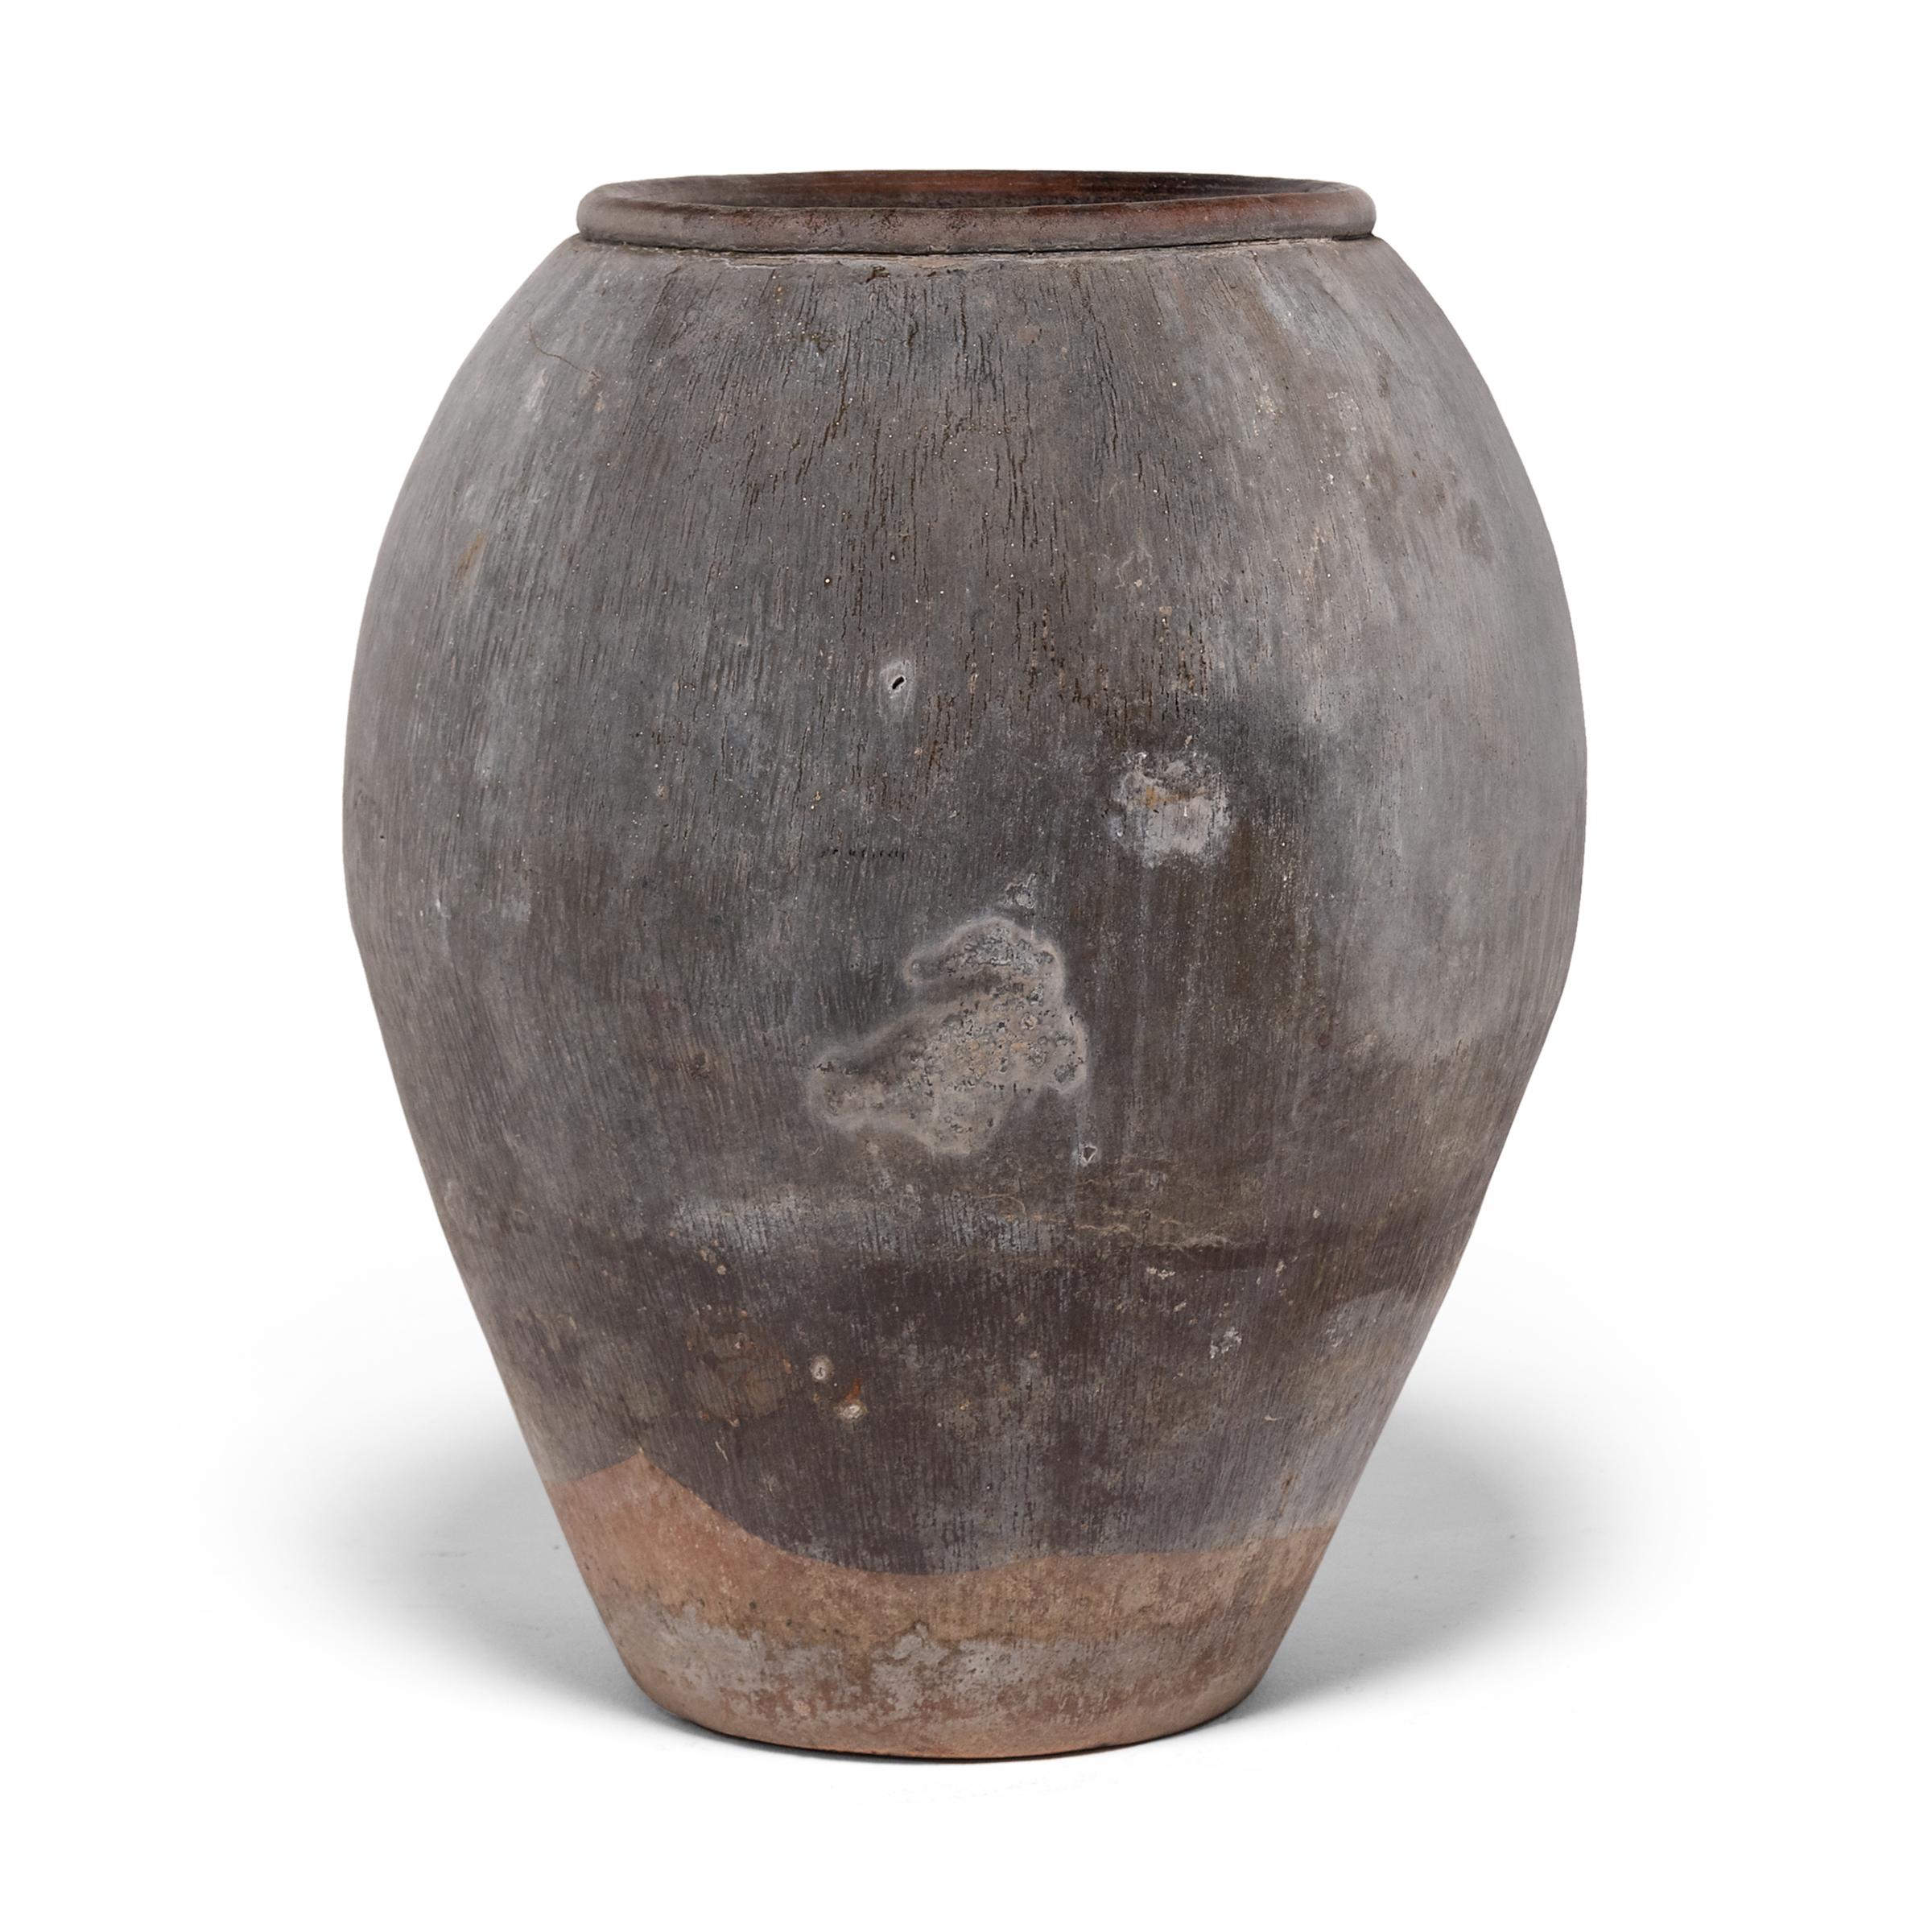 Charged with the humble task of storing dry goods, this tall earthenware jar has a graceful, tapered form and beautifully irregular unglazed surface. Contact with smoke during firing has given the vessel a gorgeous finish of neutral colors, from